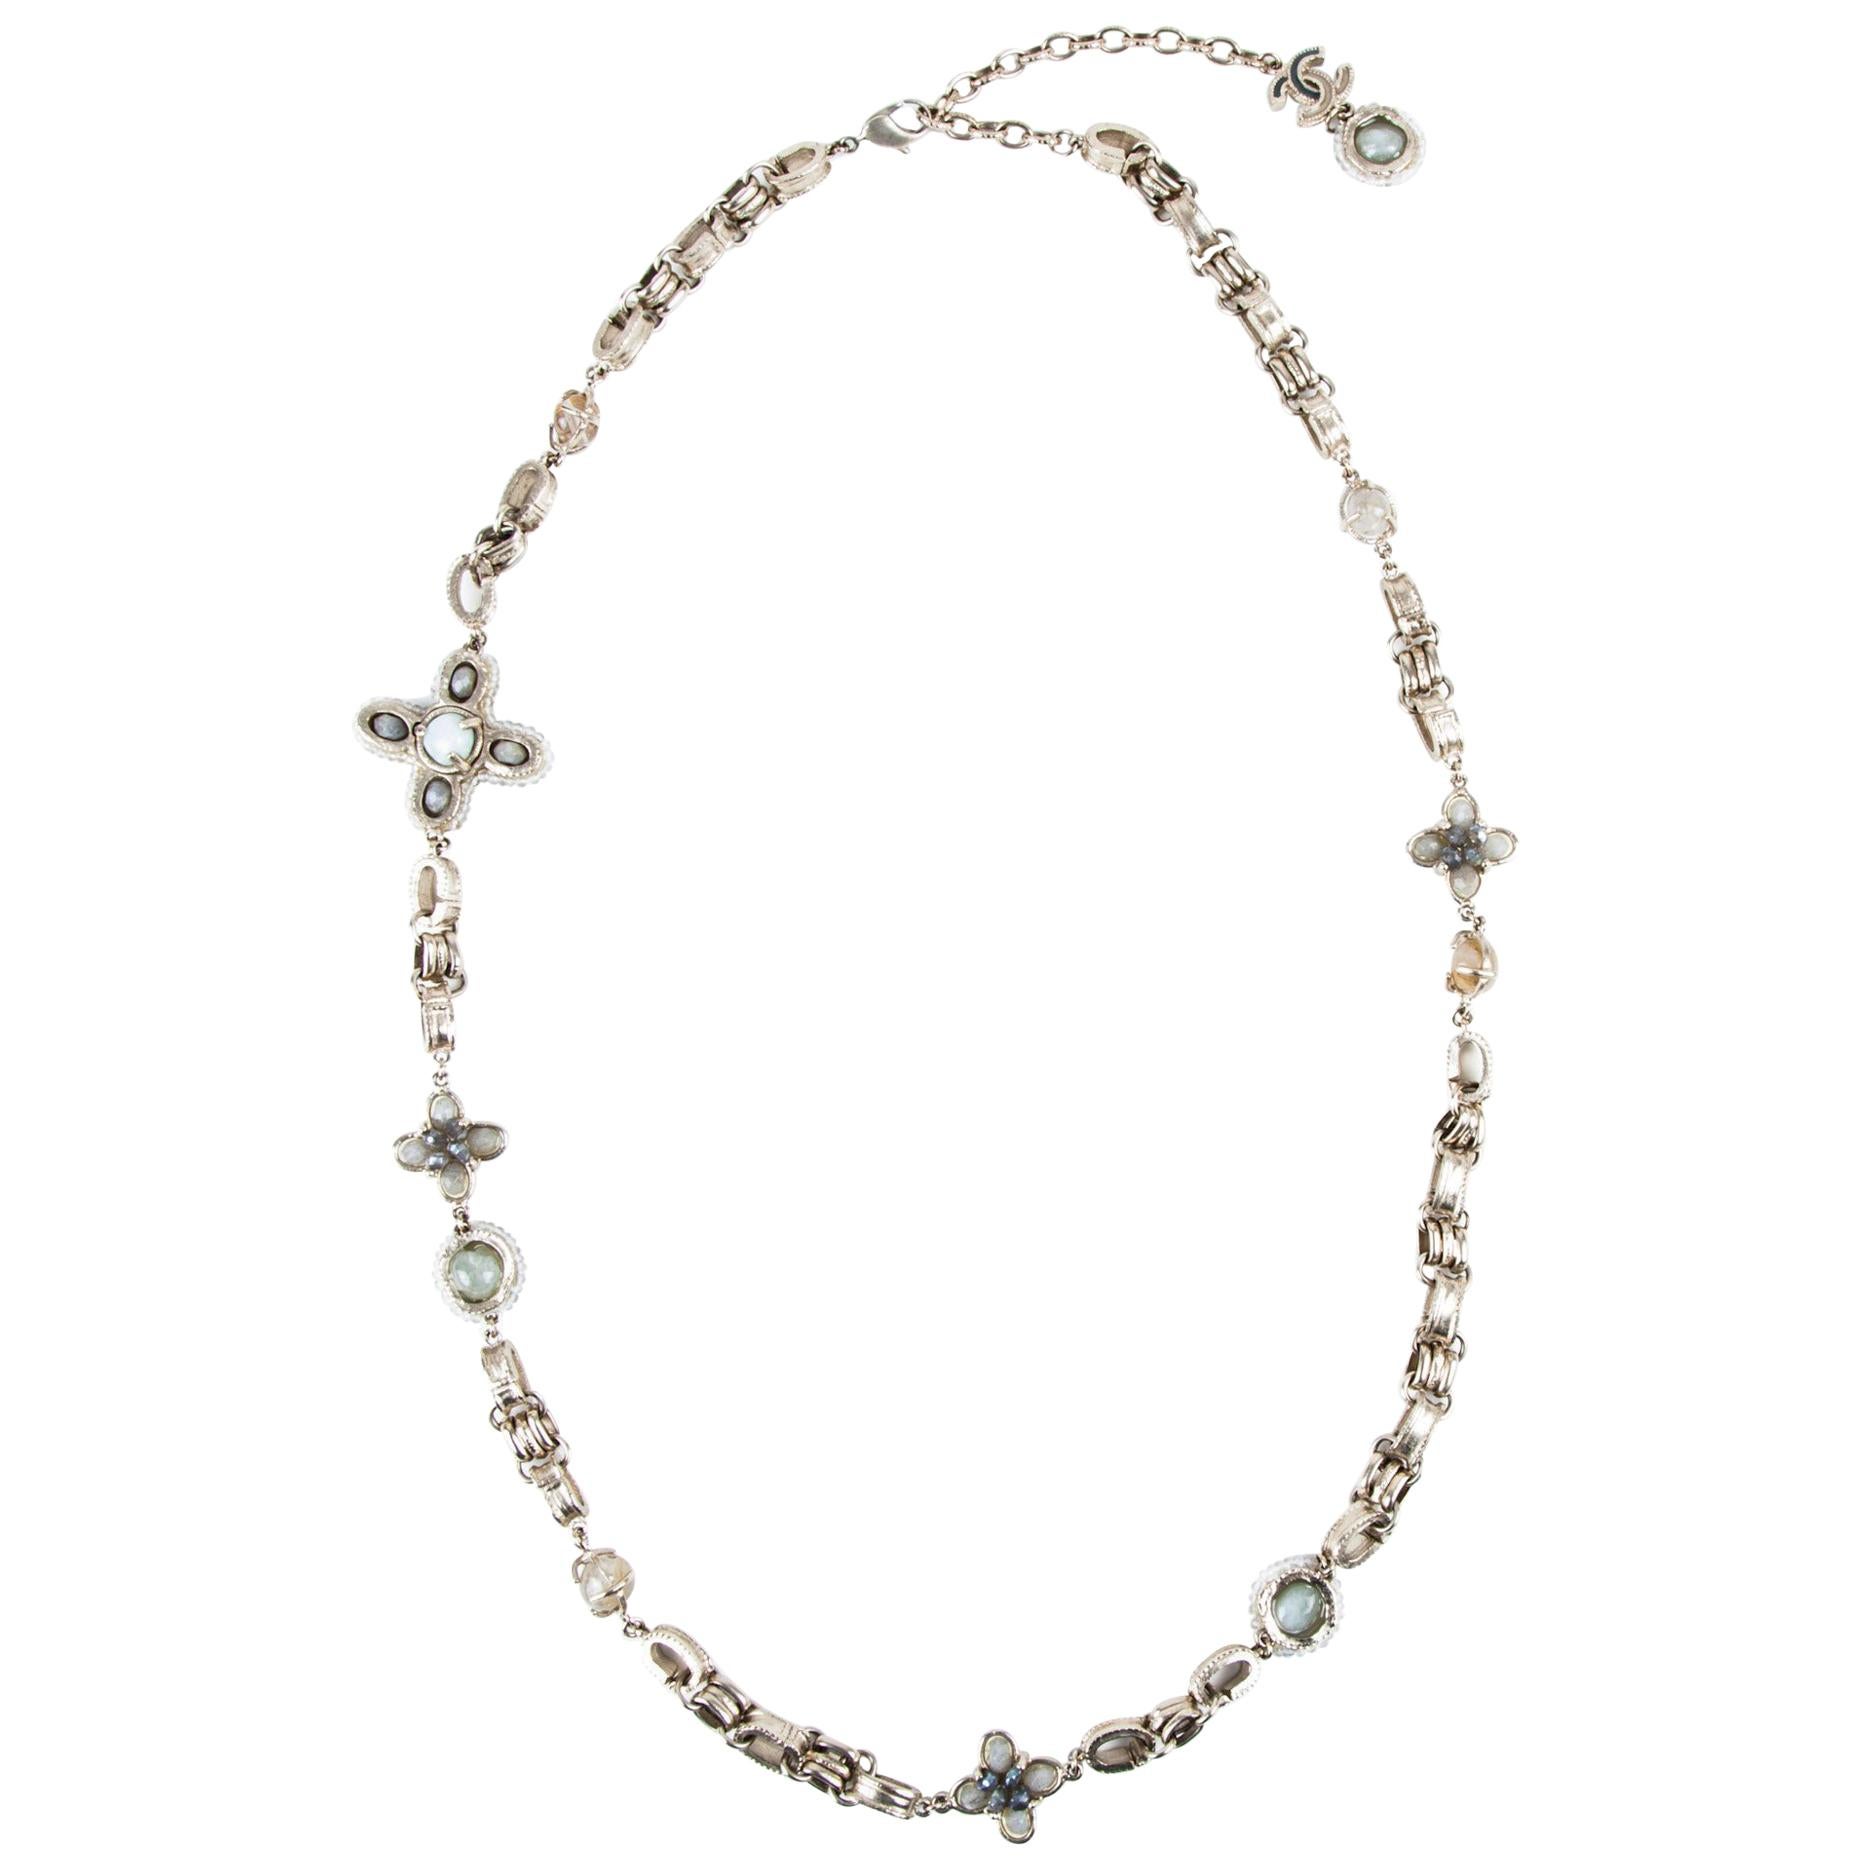 Chanel Paris-Bombay Beaded Necklace in Matte Gilt Metal For Sale